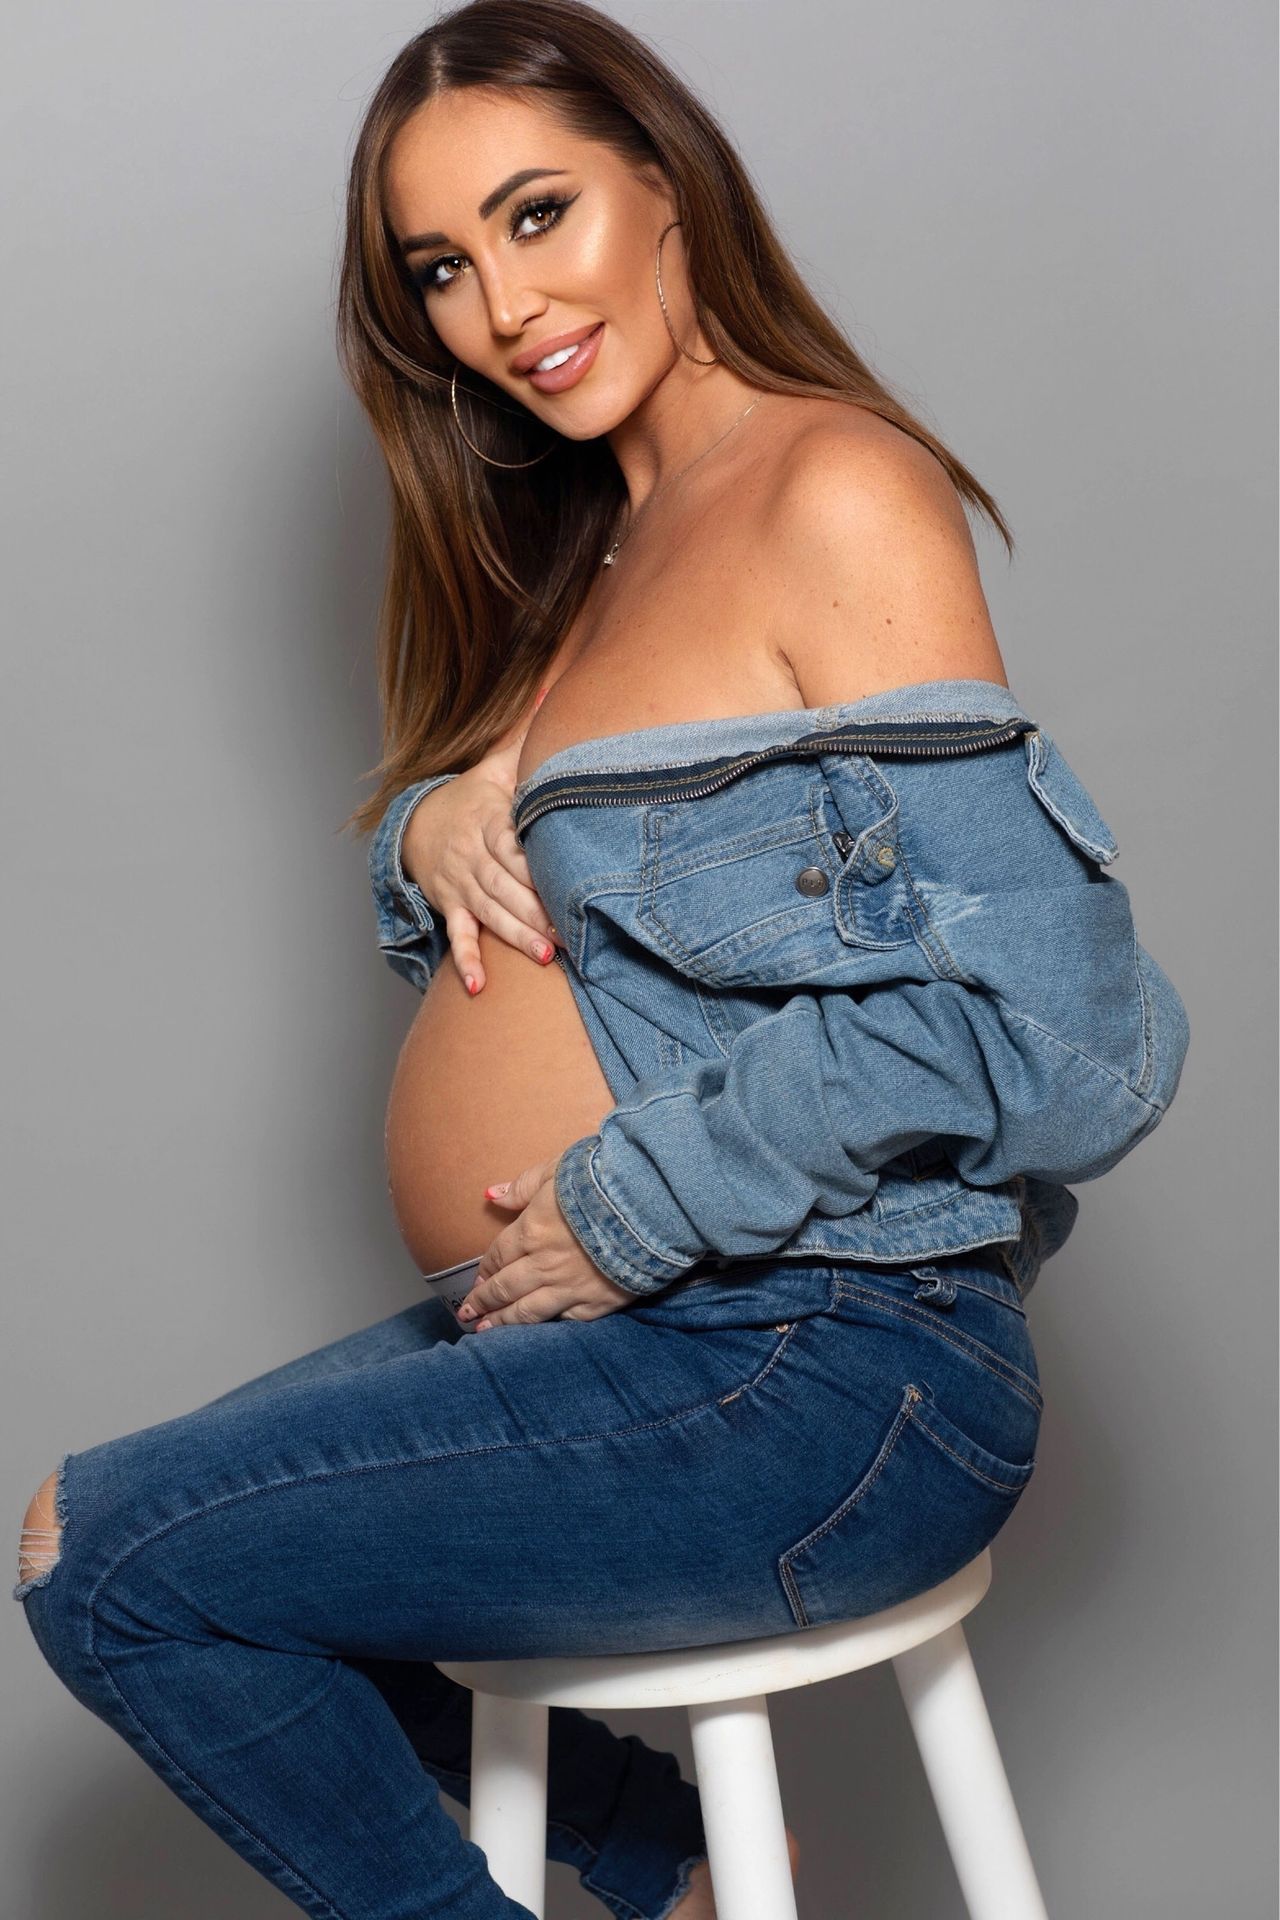 Lauryn Goodman Pictured Showing Off Baby Bump 0001